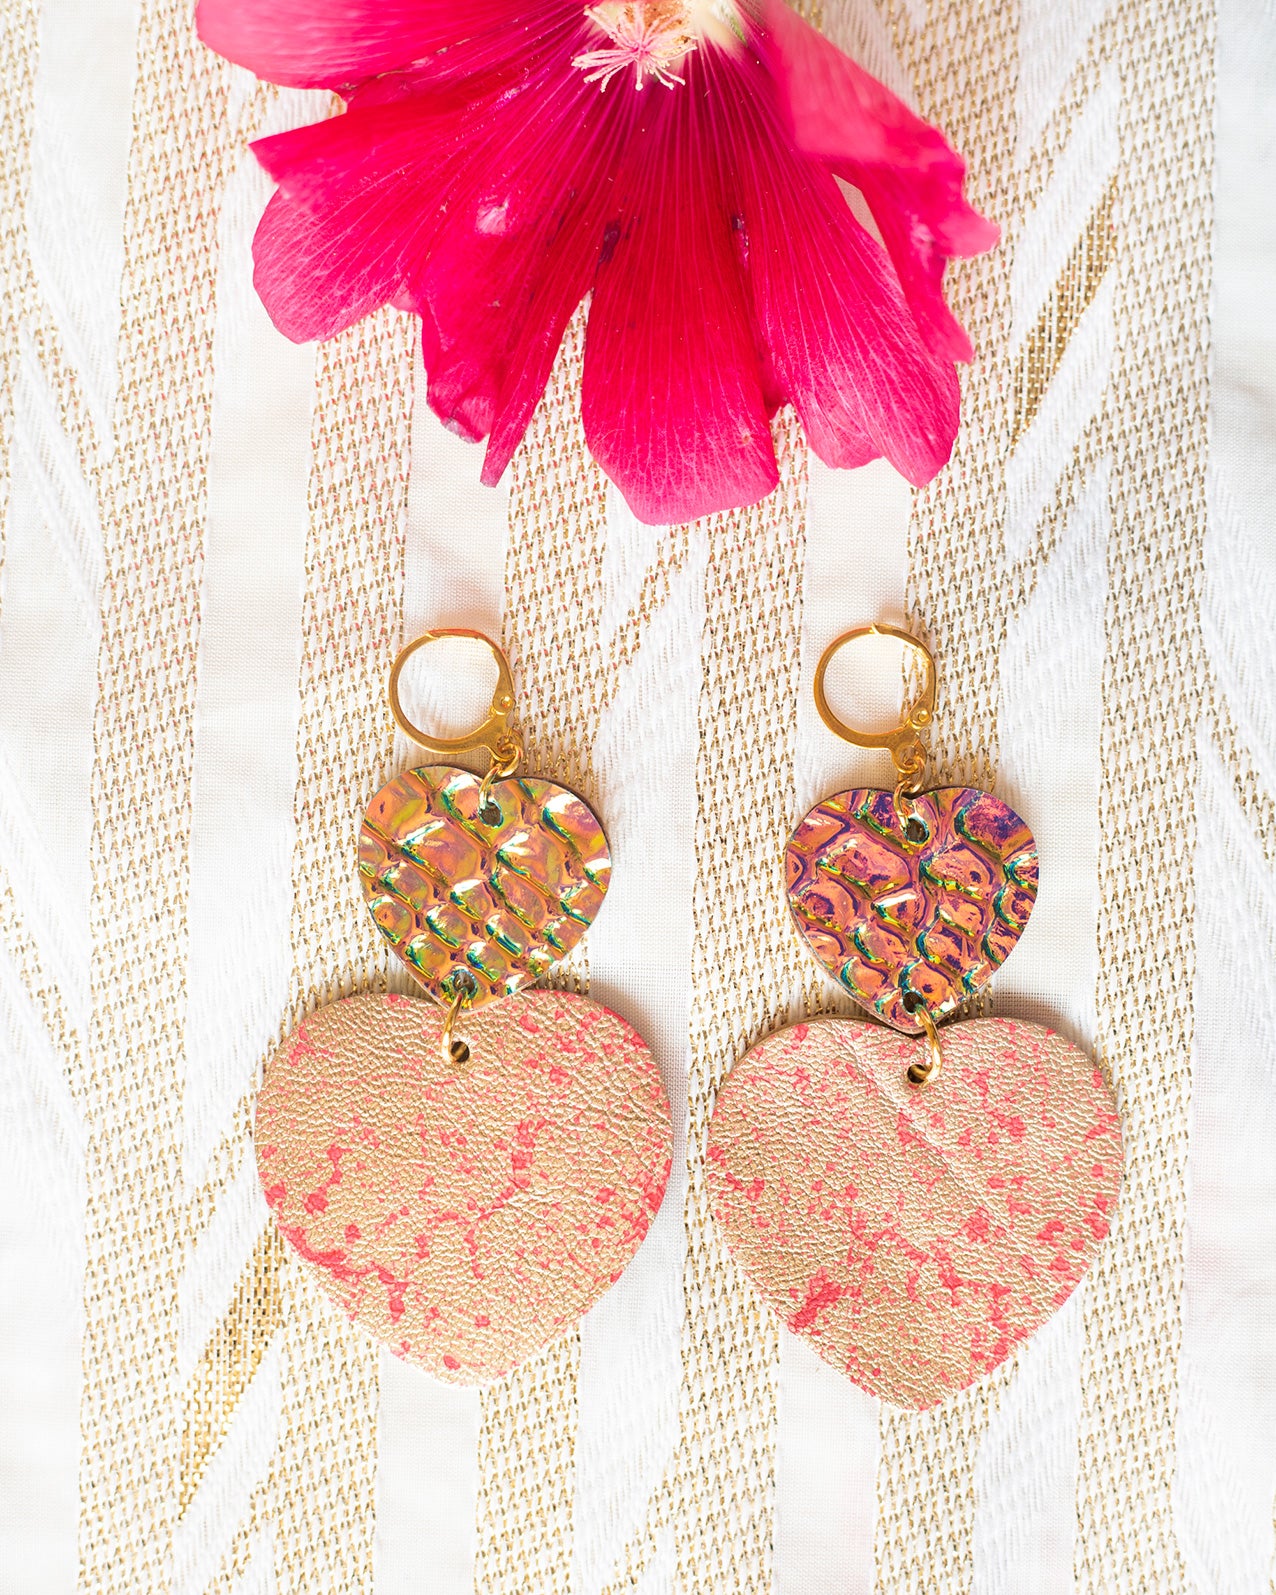 Double Hearts earrings - holographic leather and metallic coral pink